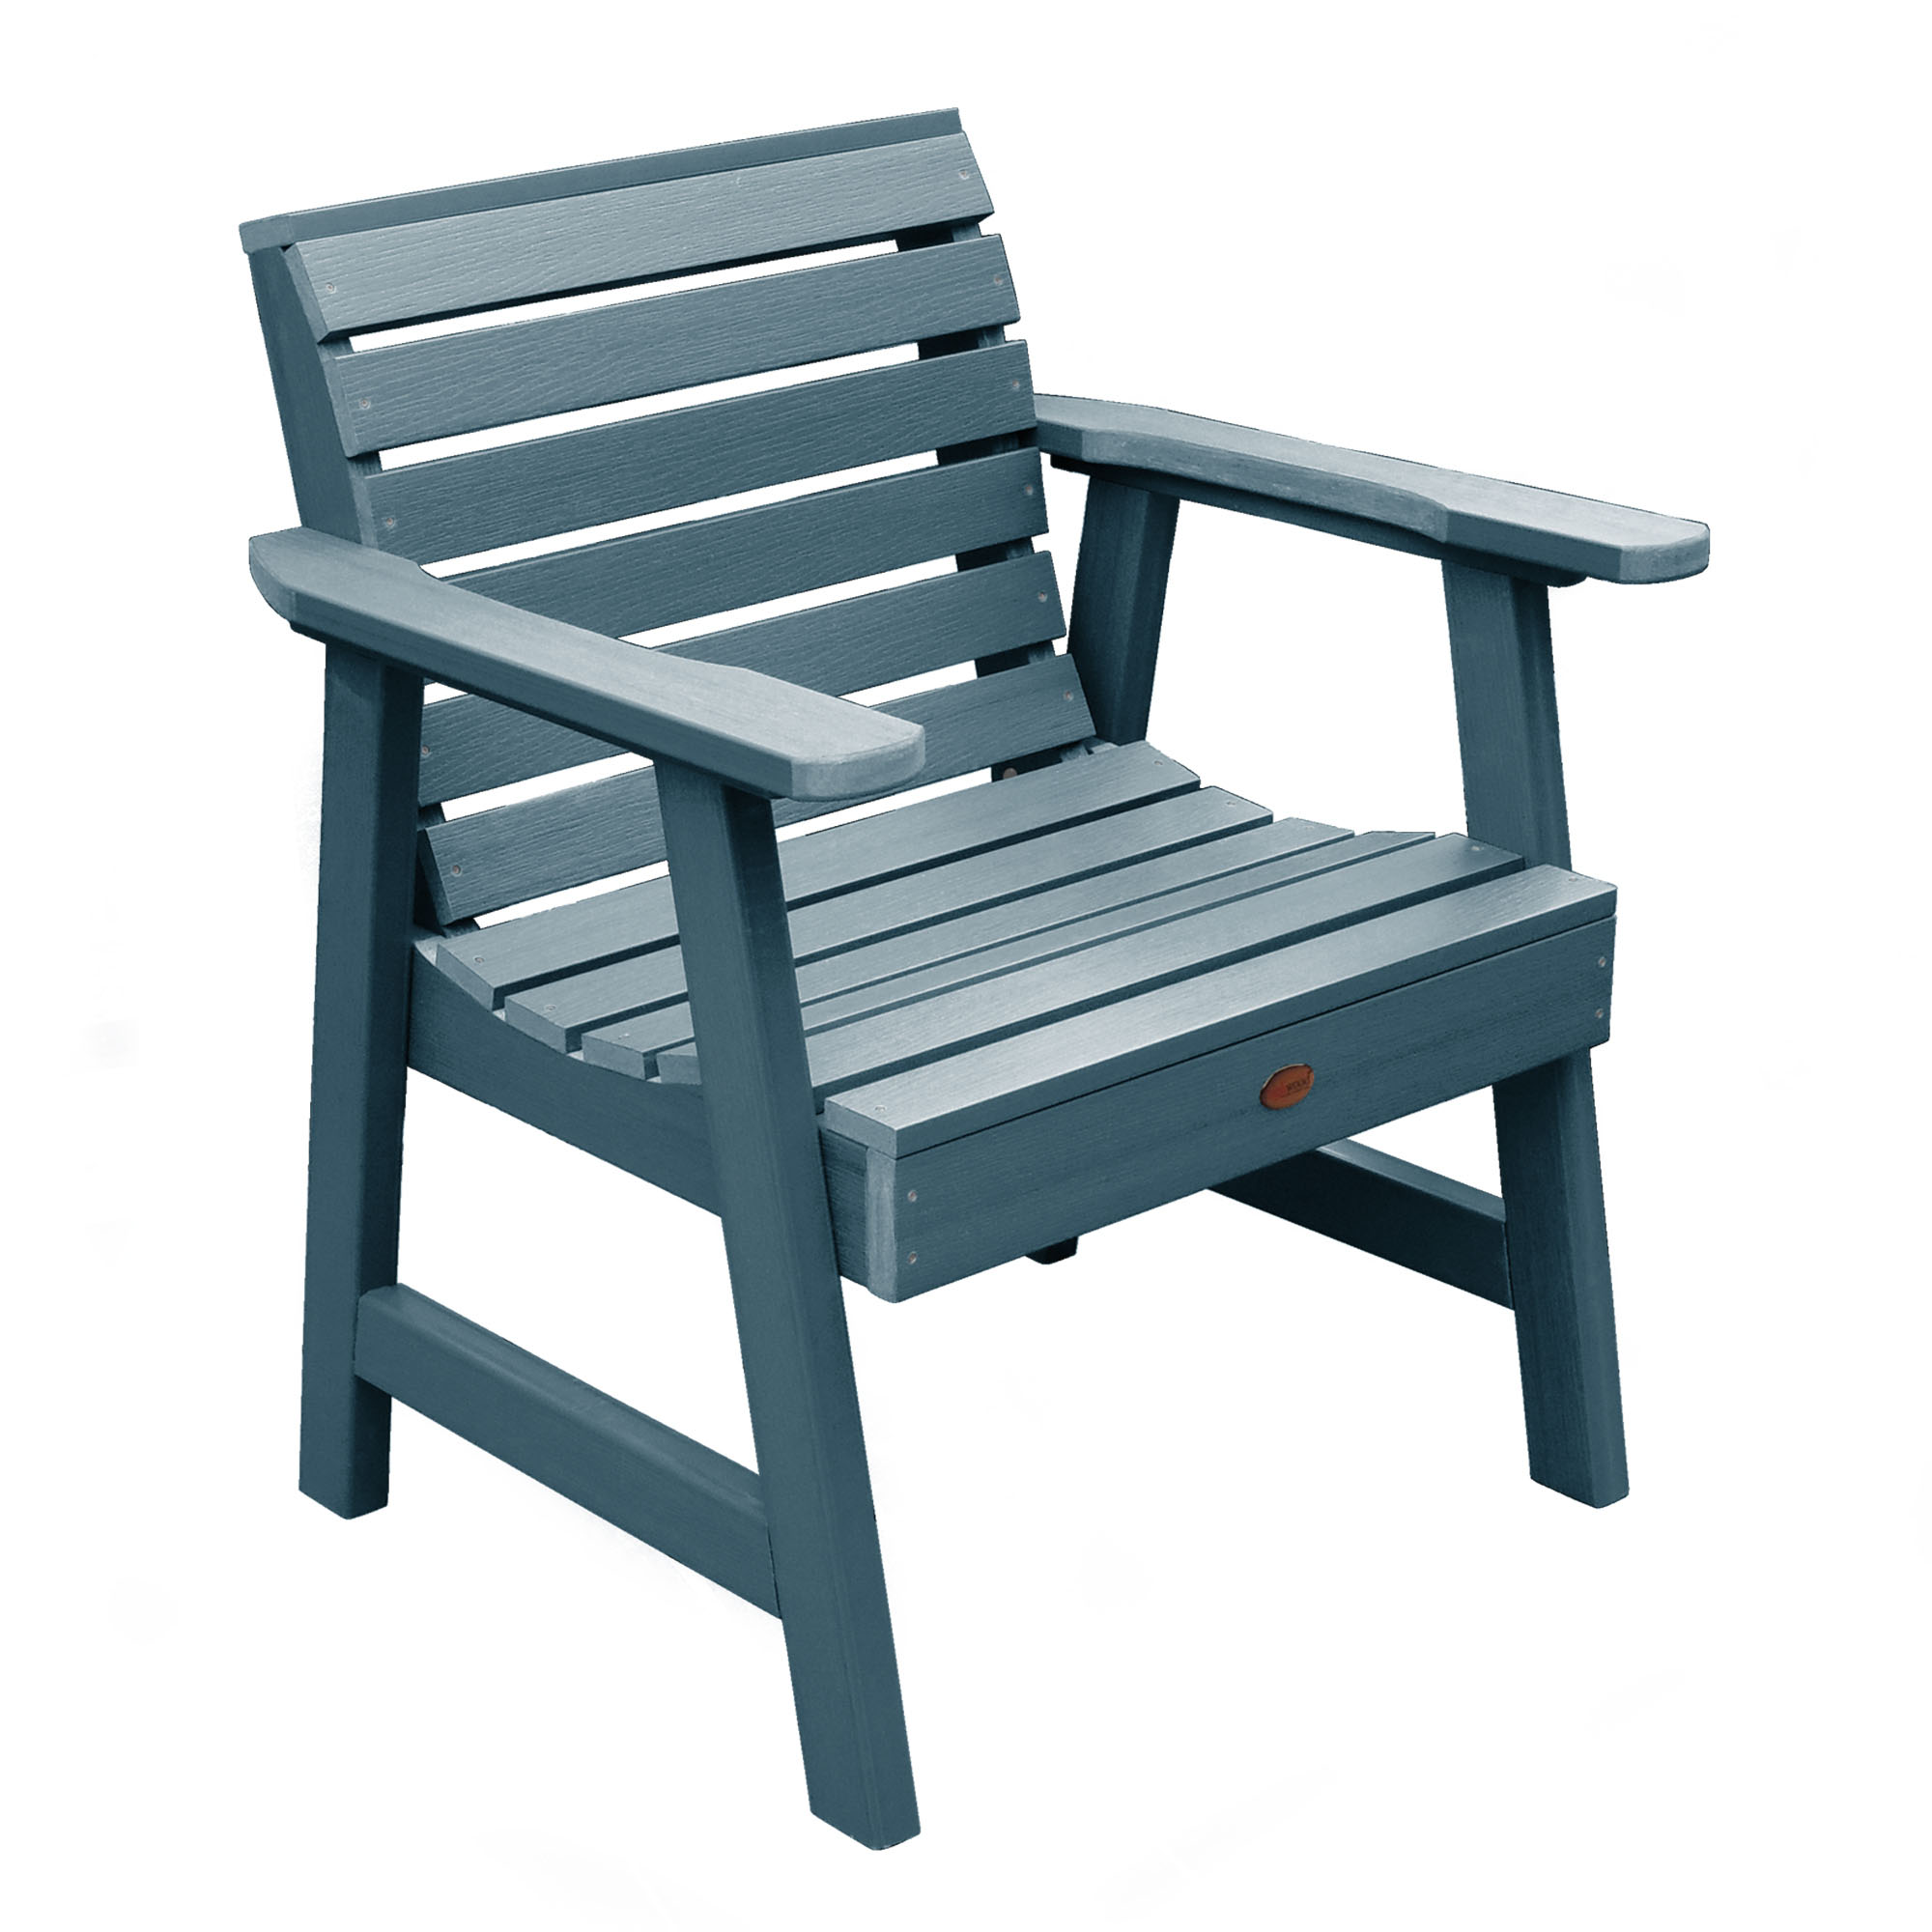 Highwood 3pc Weatherly Garden Chair Set with 1 Adirondack Square Side Table - image 3 of 6